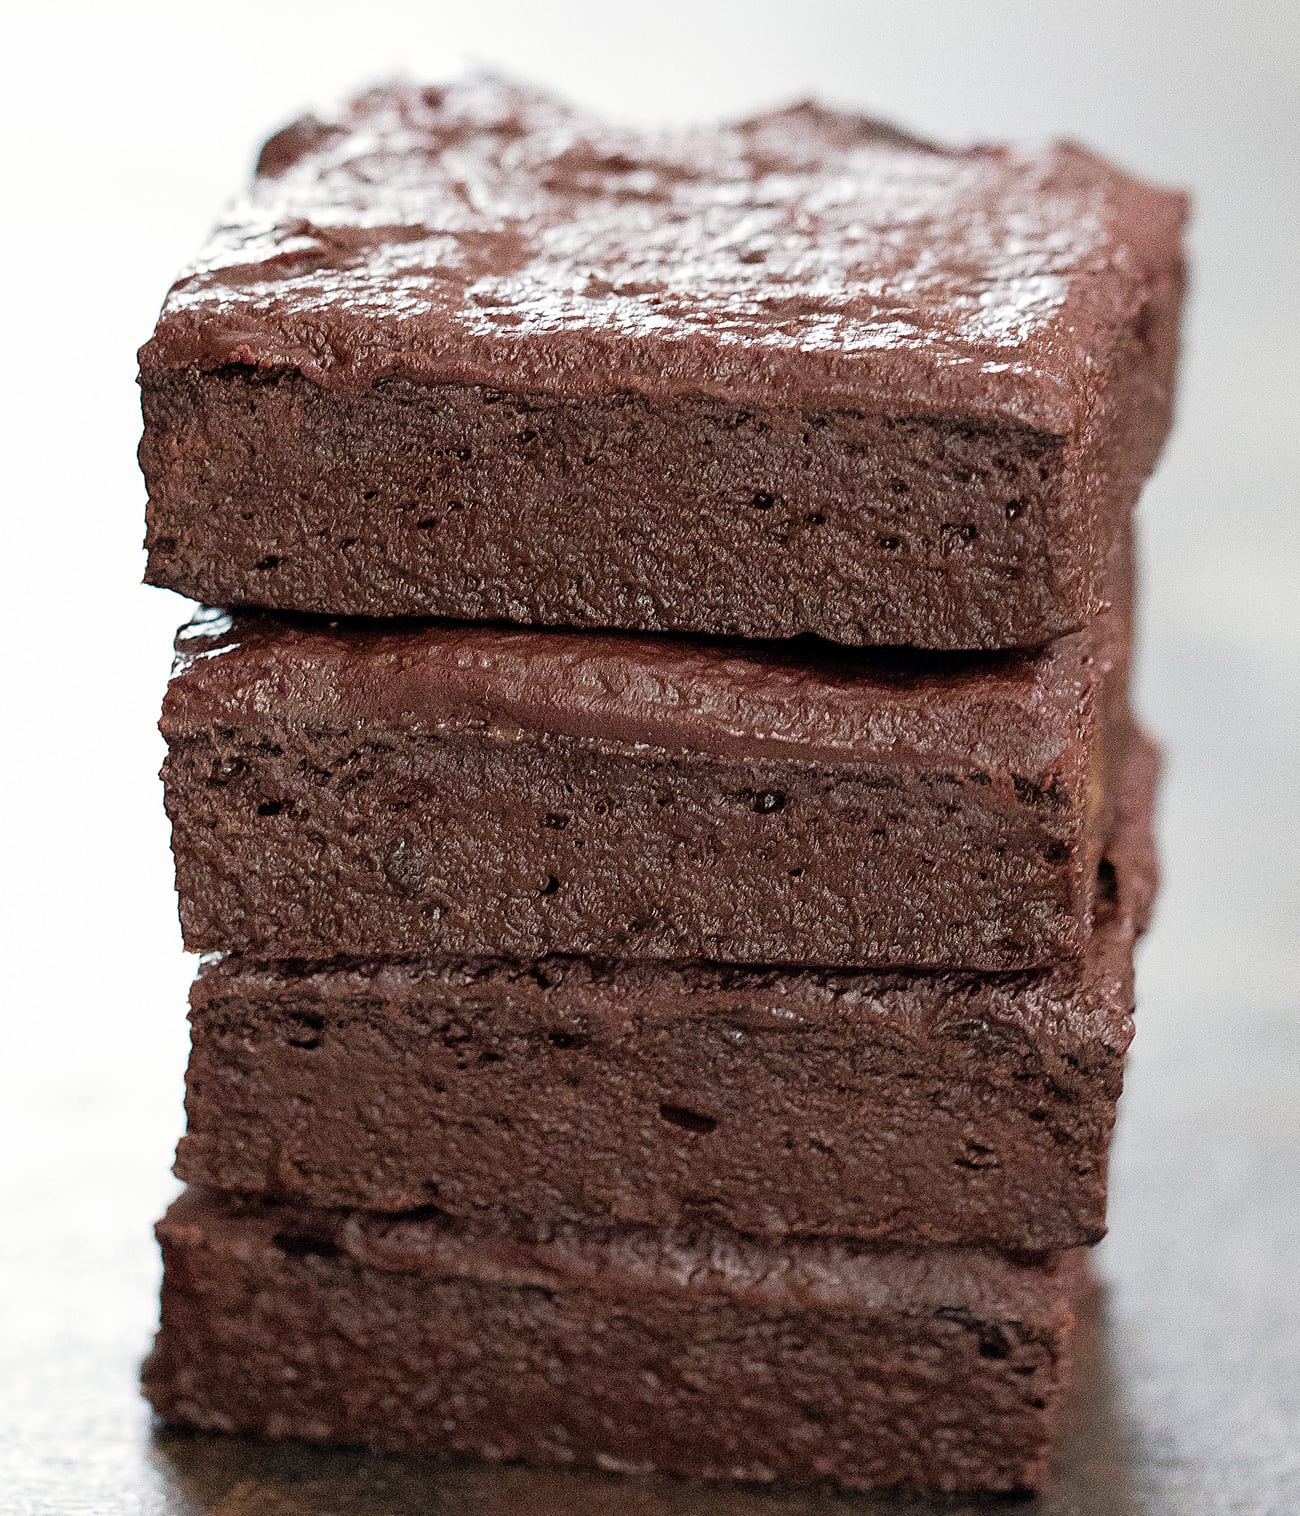 2 Ingredient Healthy Brownies (No Flour, Butter, Eggs or Refined Sugar ...